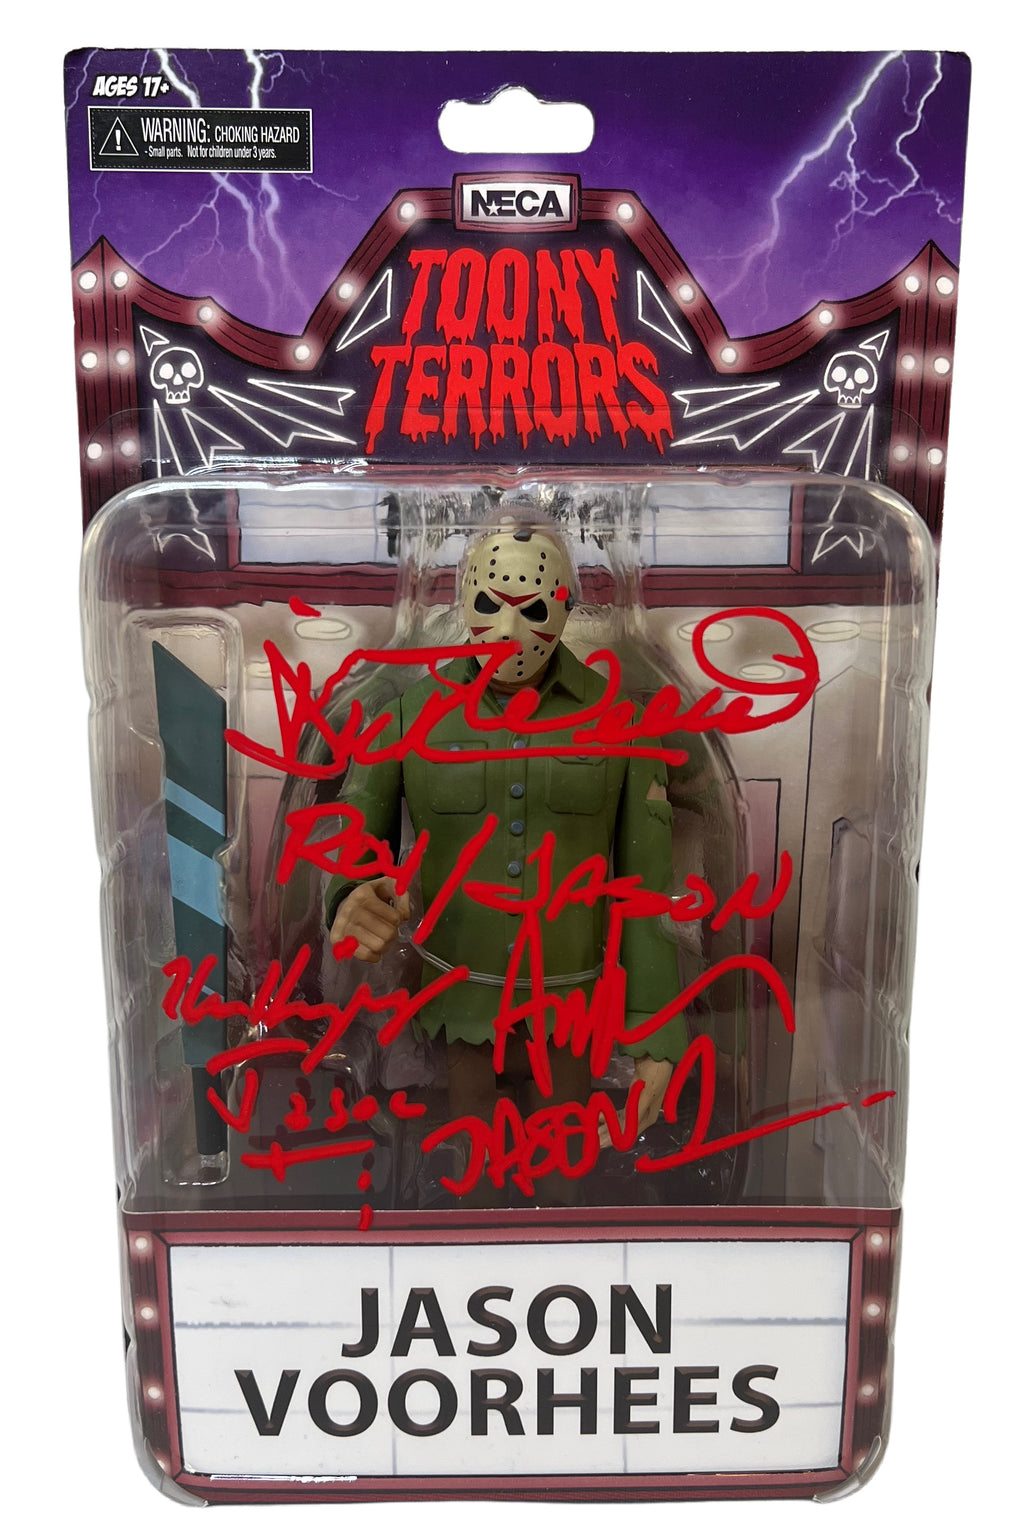 Lehman, Kirzinger, Wieand signed inscribed Jason Voorhees action figure JSA COA Friday the 13th